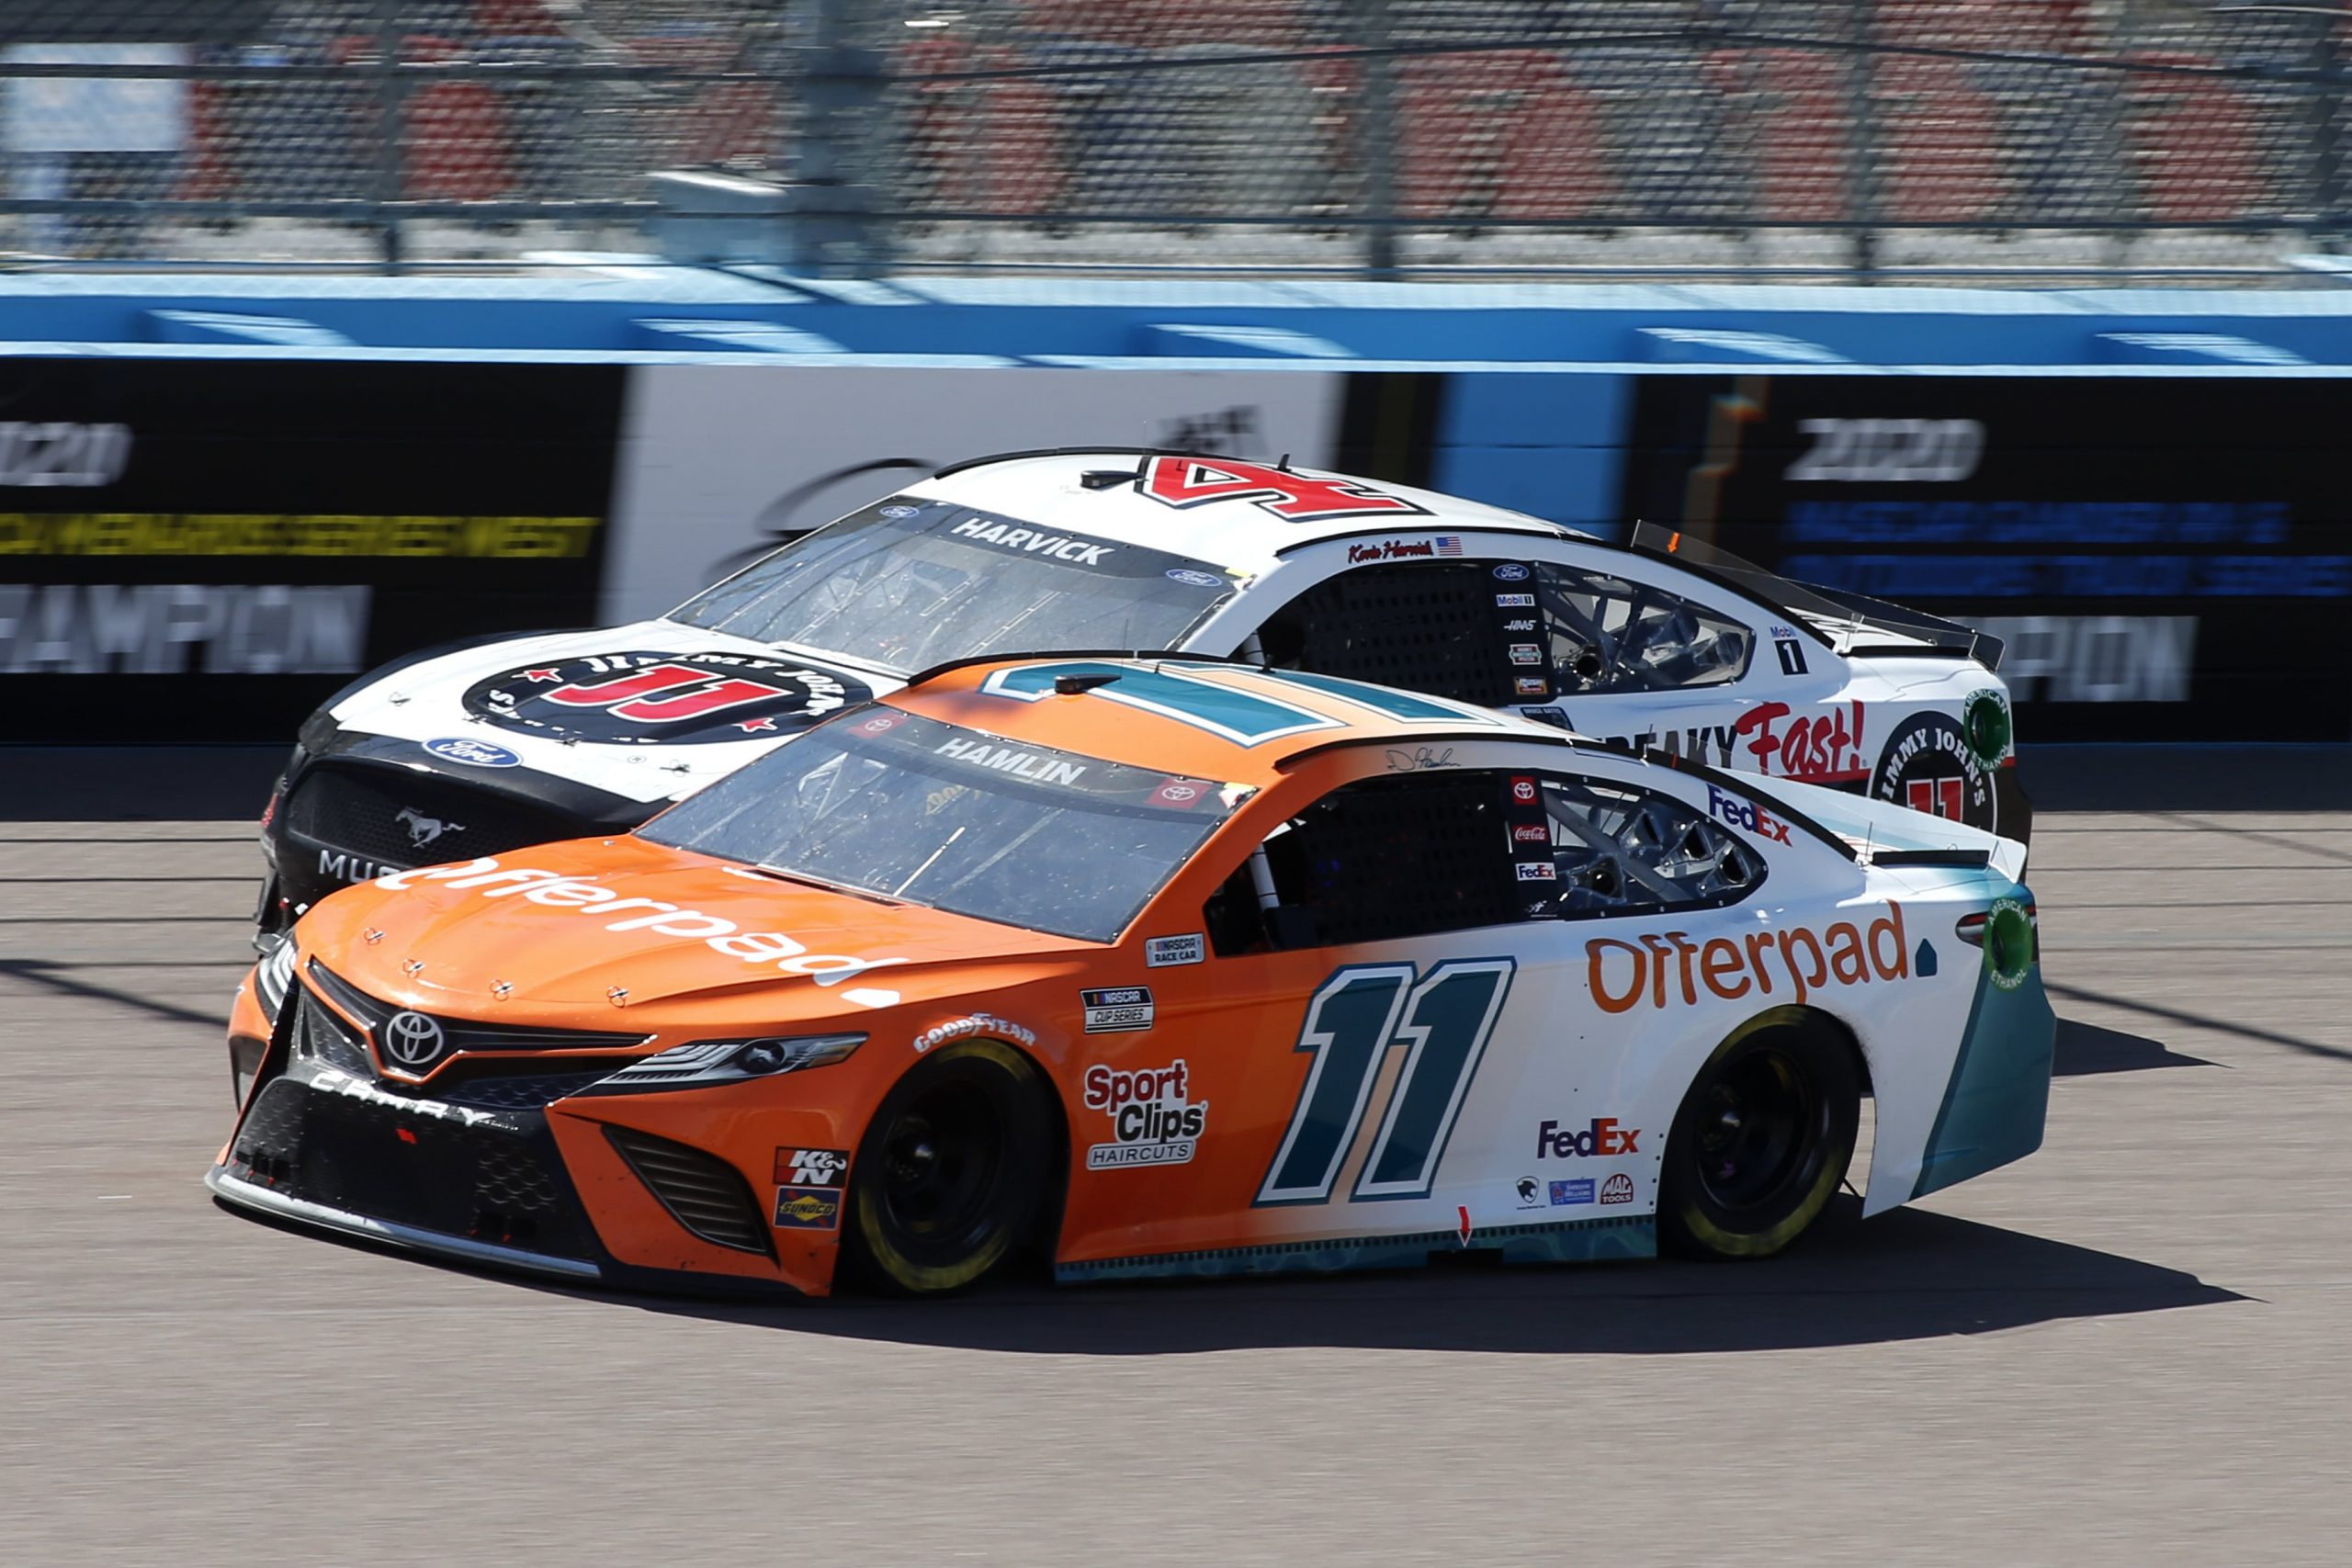 Kevin Harvick and Denny Hamlin are best bets for Ruoff Mortgage 500 at Phoenix